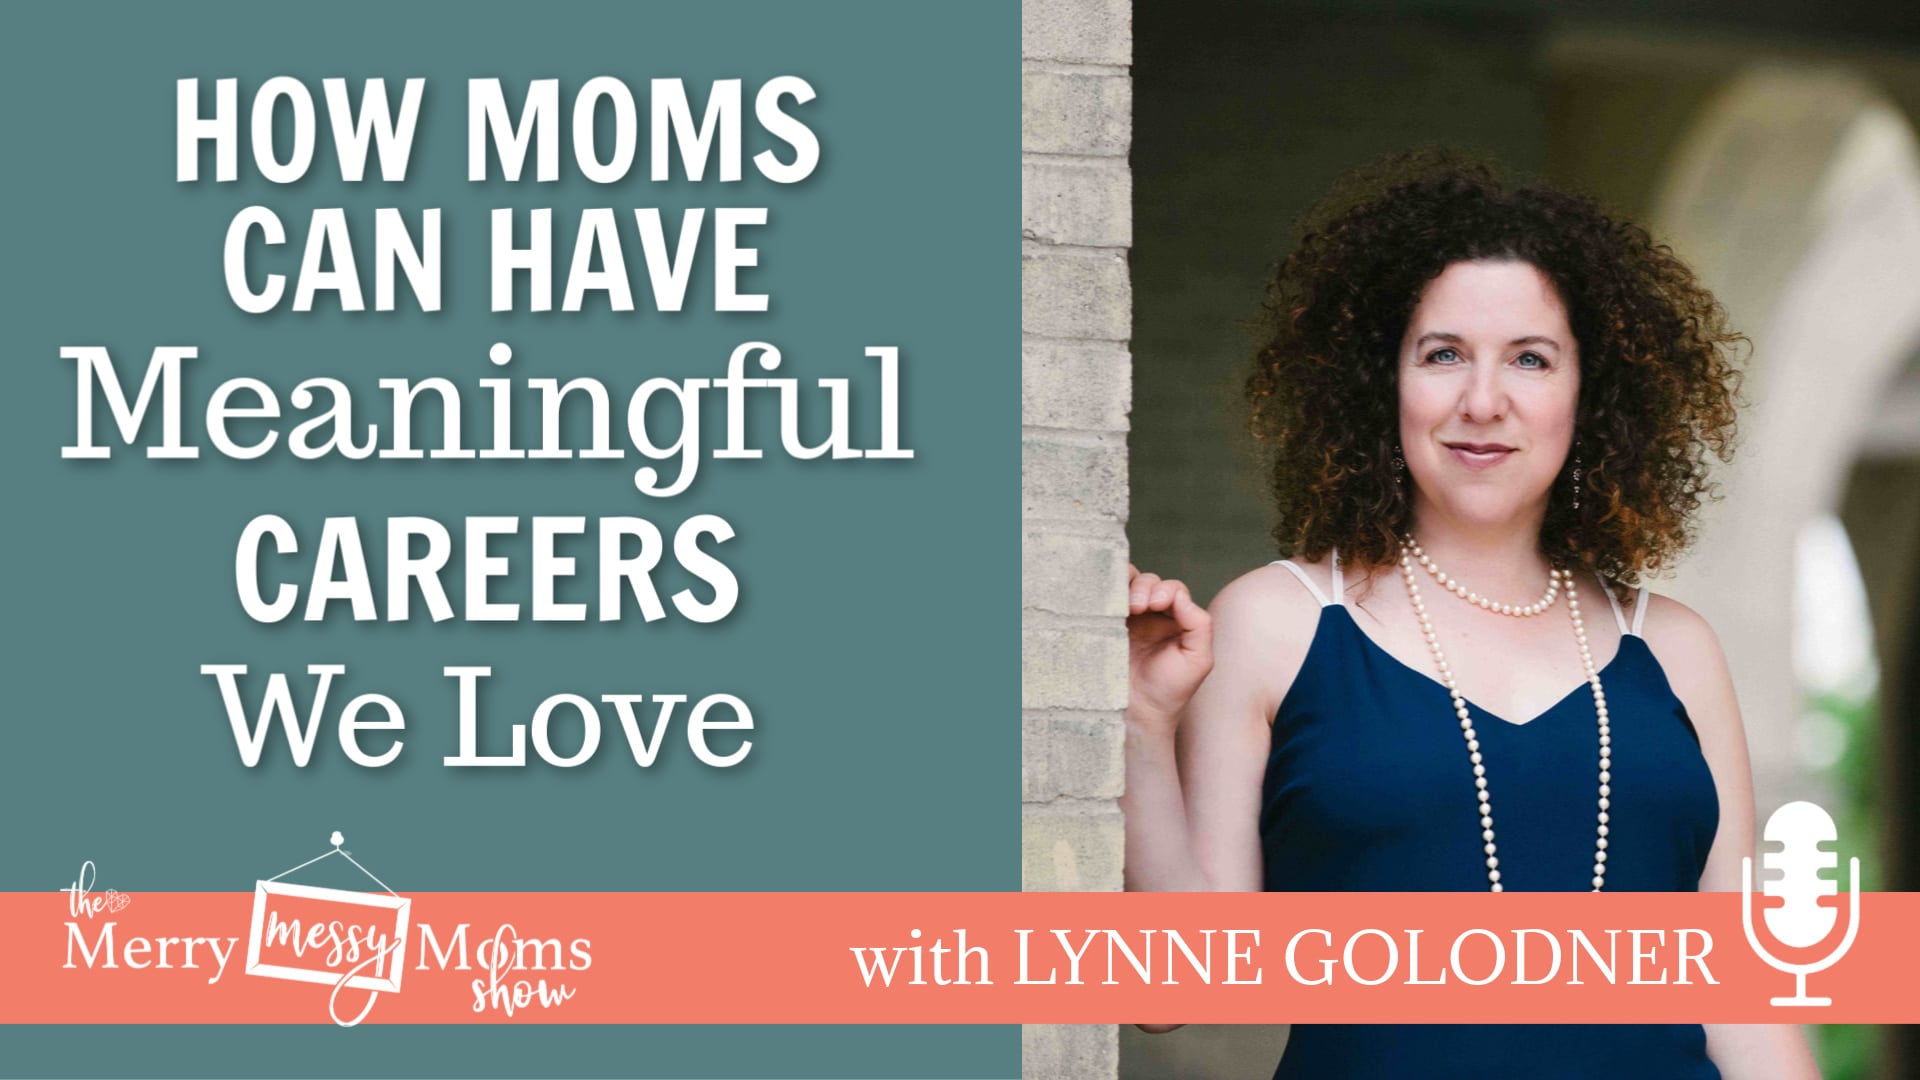 How Moms Can Have Meaningful Careers We Love - career advice for moms